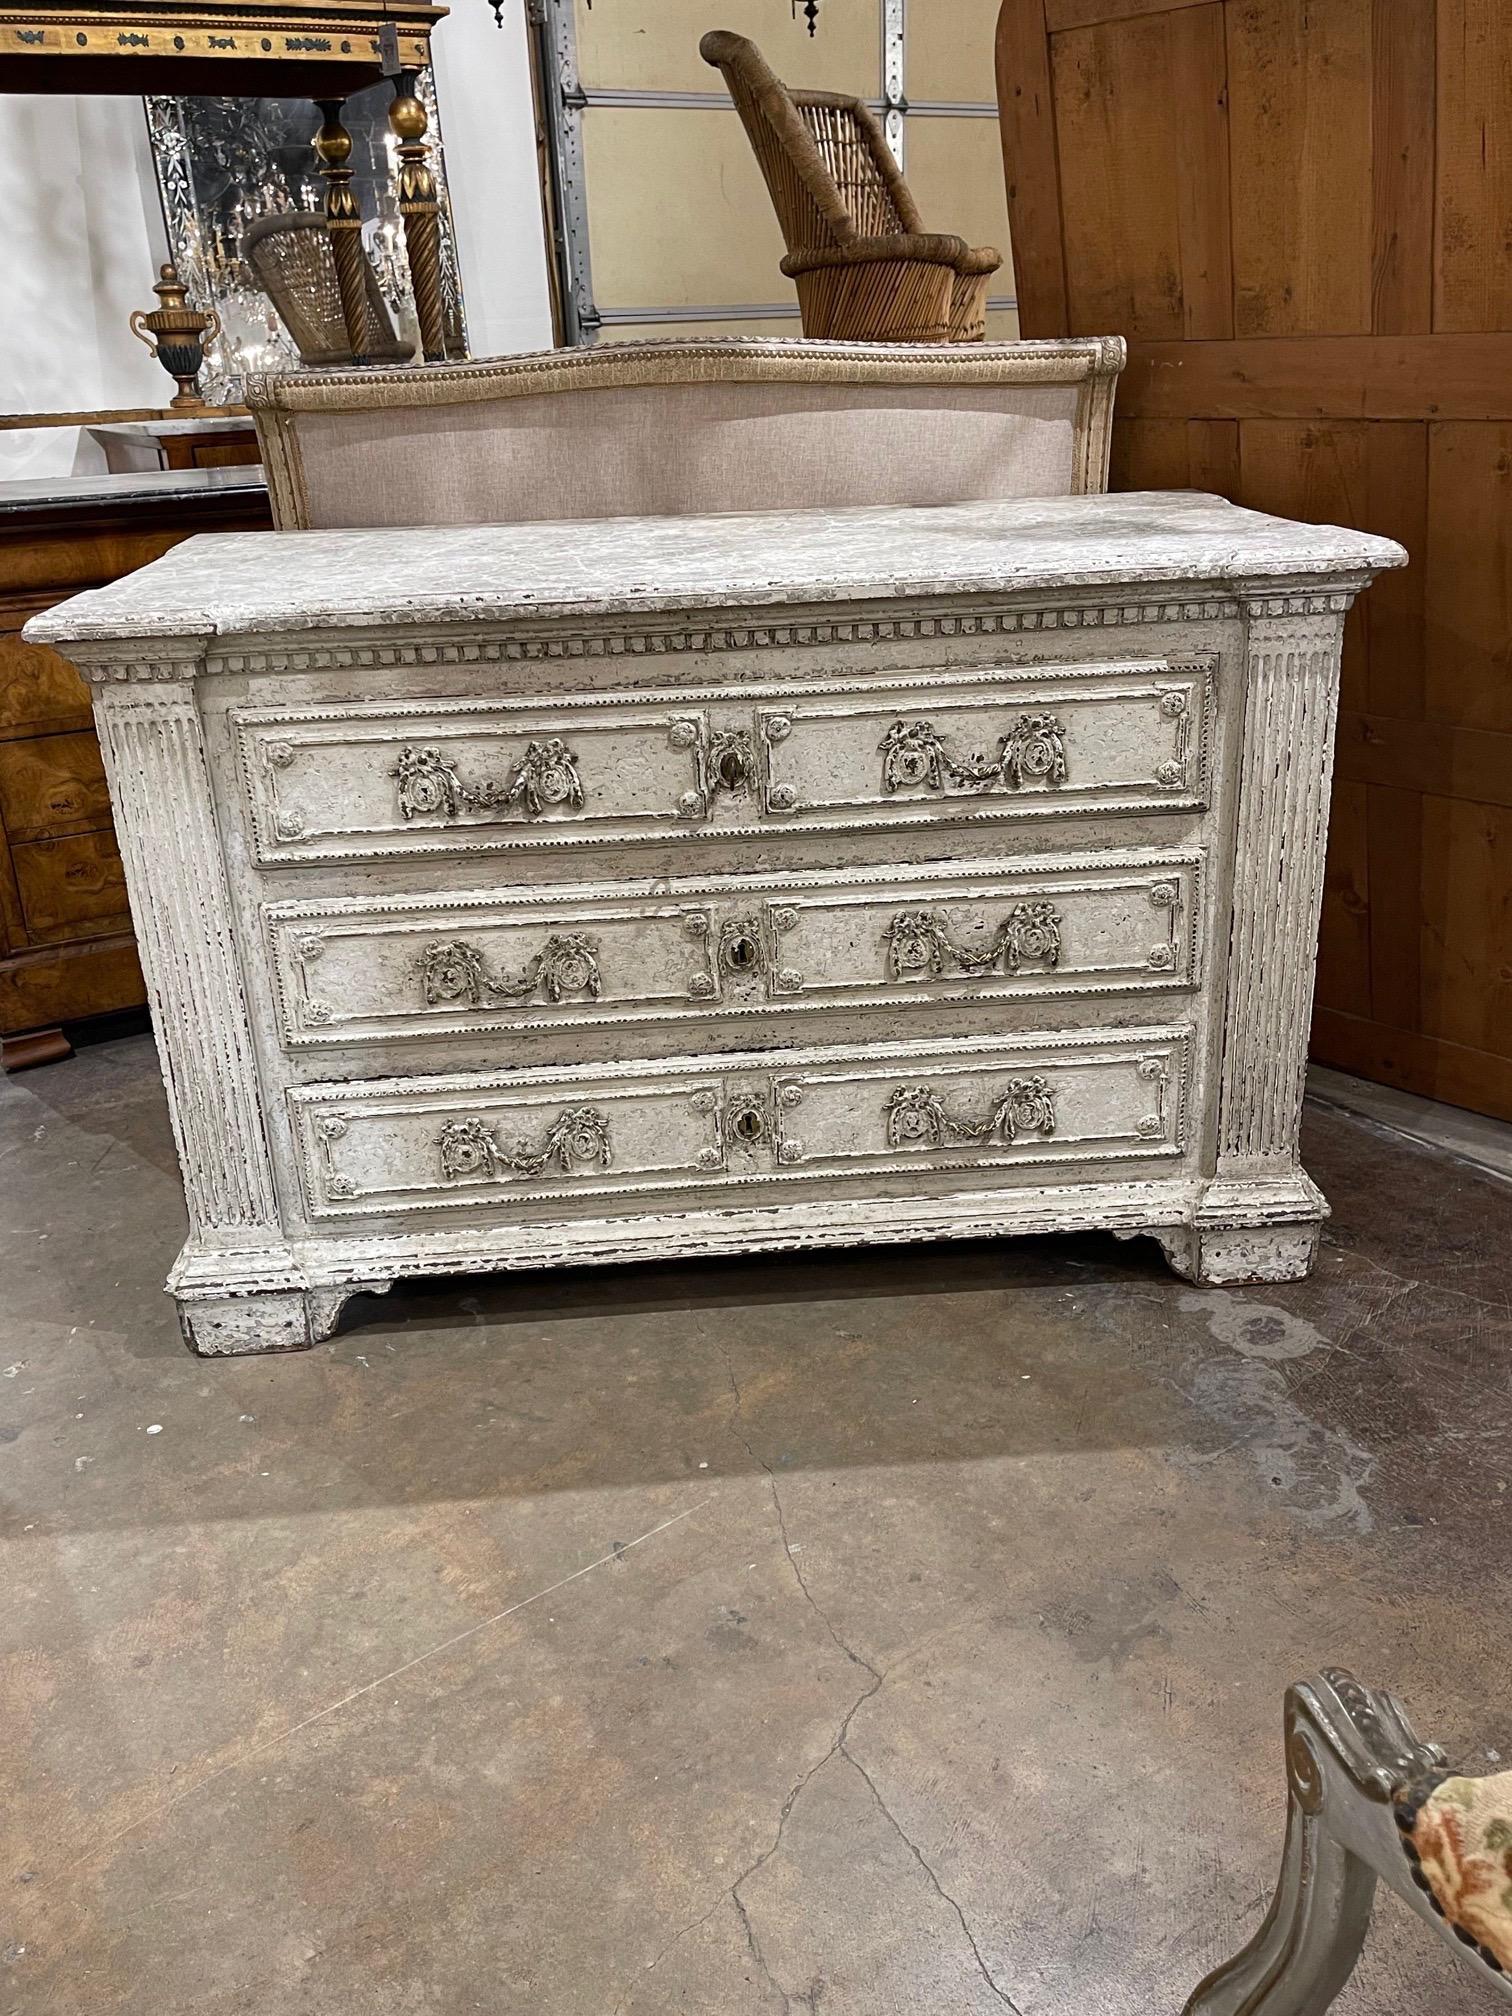 Fabulous 18th century French carved and painted oak commode. Amazing patina on this substantial piece and pretty decorative hardware. Beautiful!!